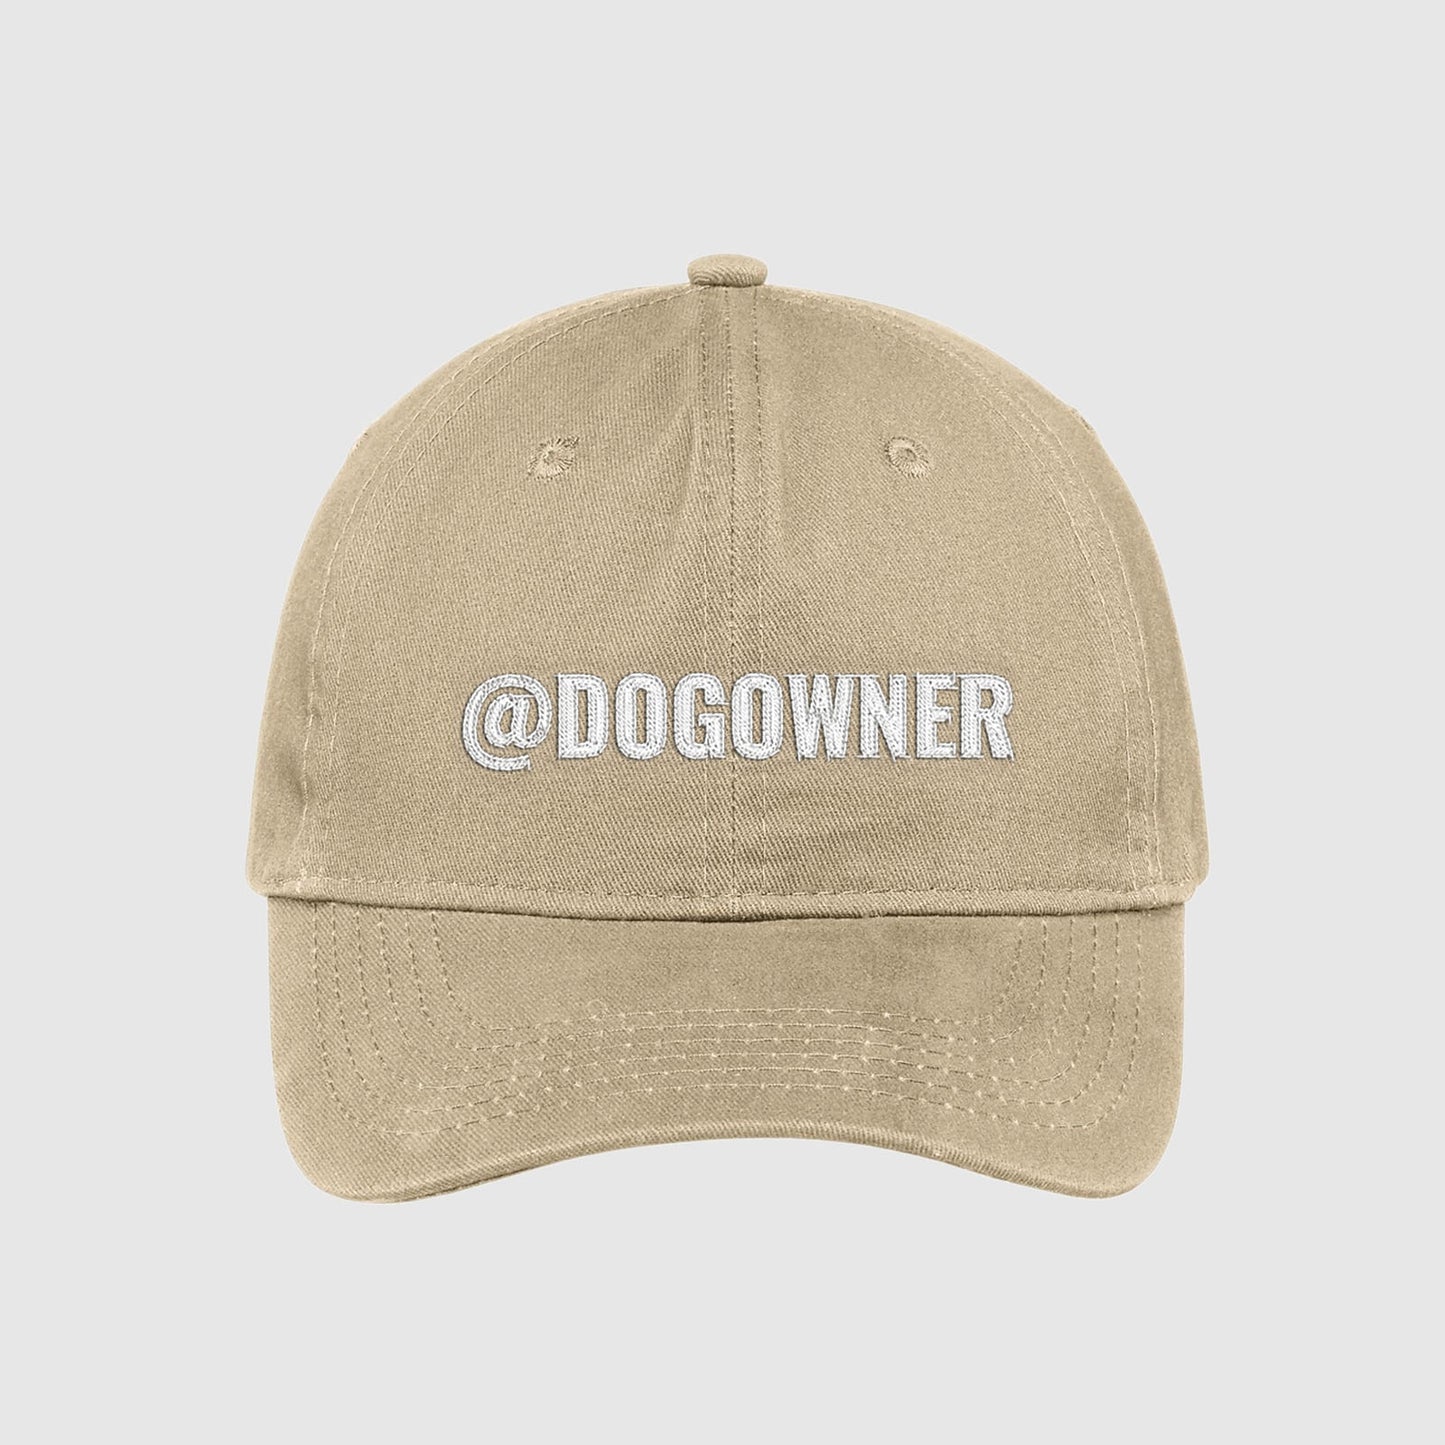 Khaki customizable hat with your social media handle embroidered on the front.